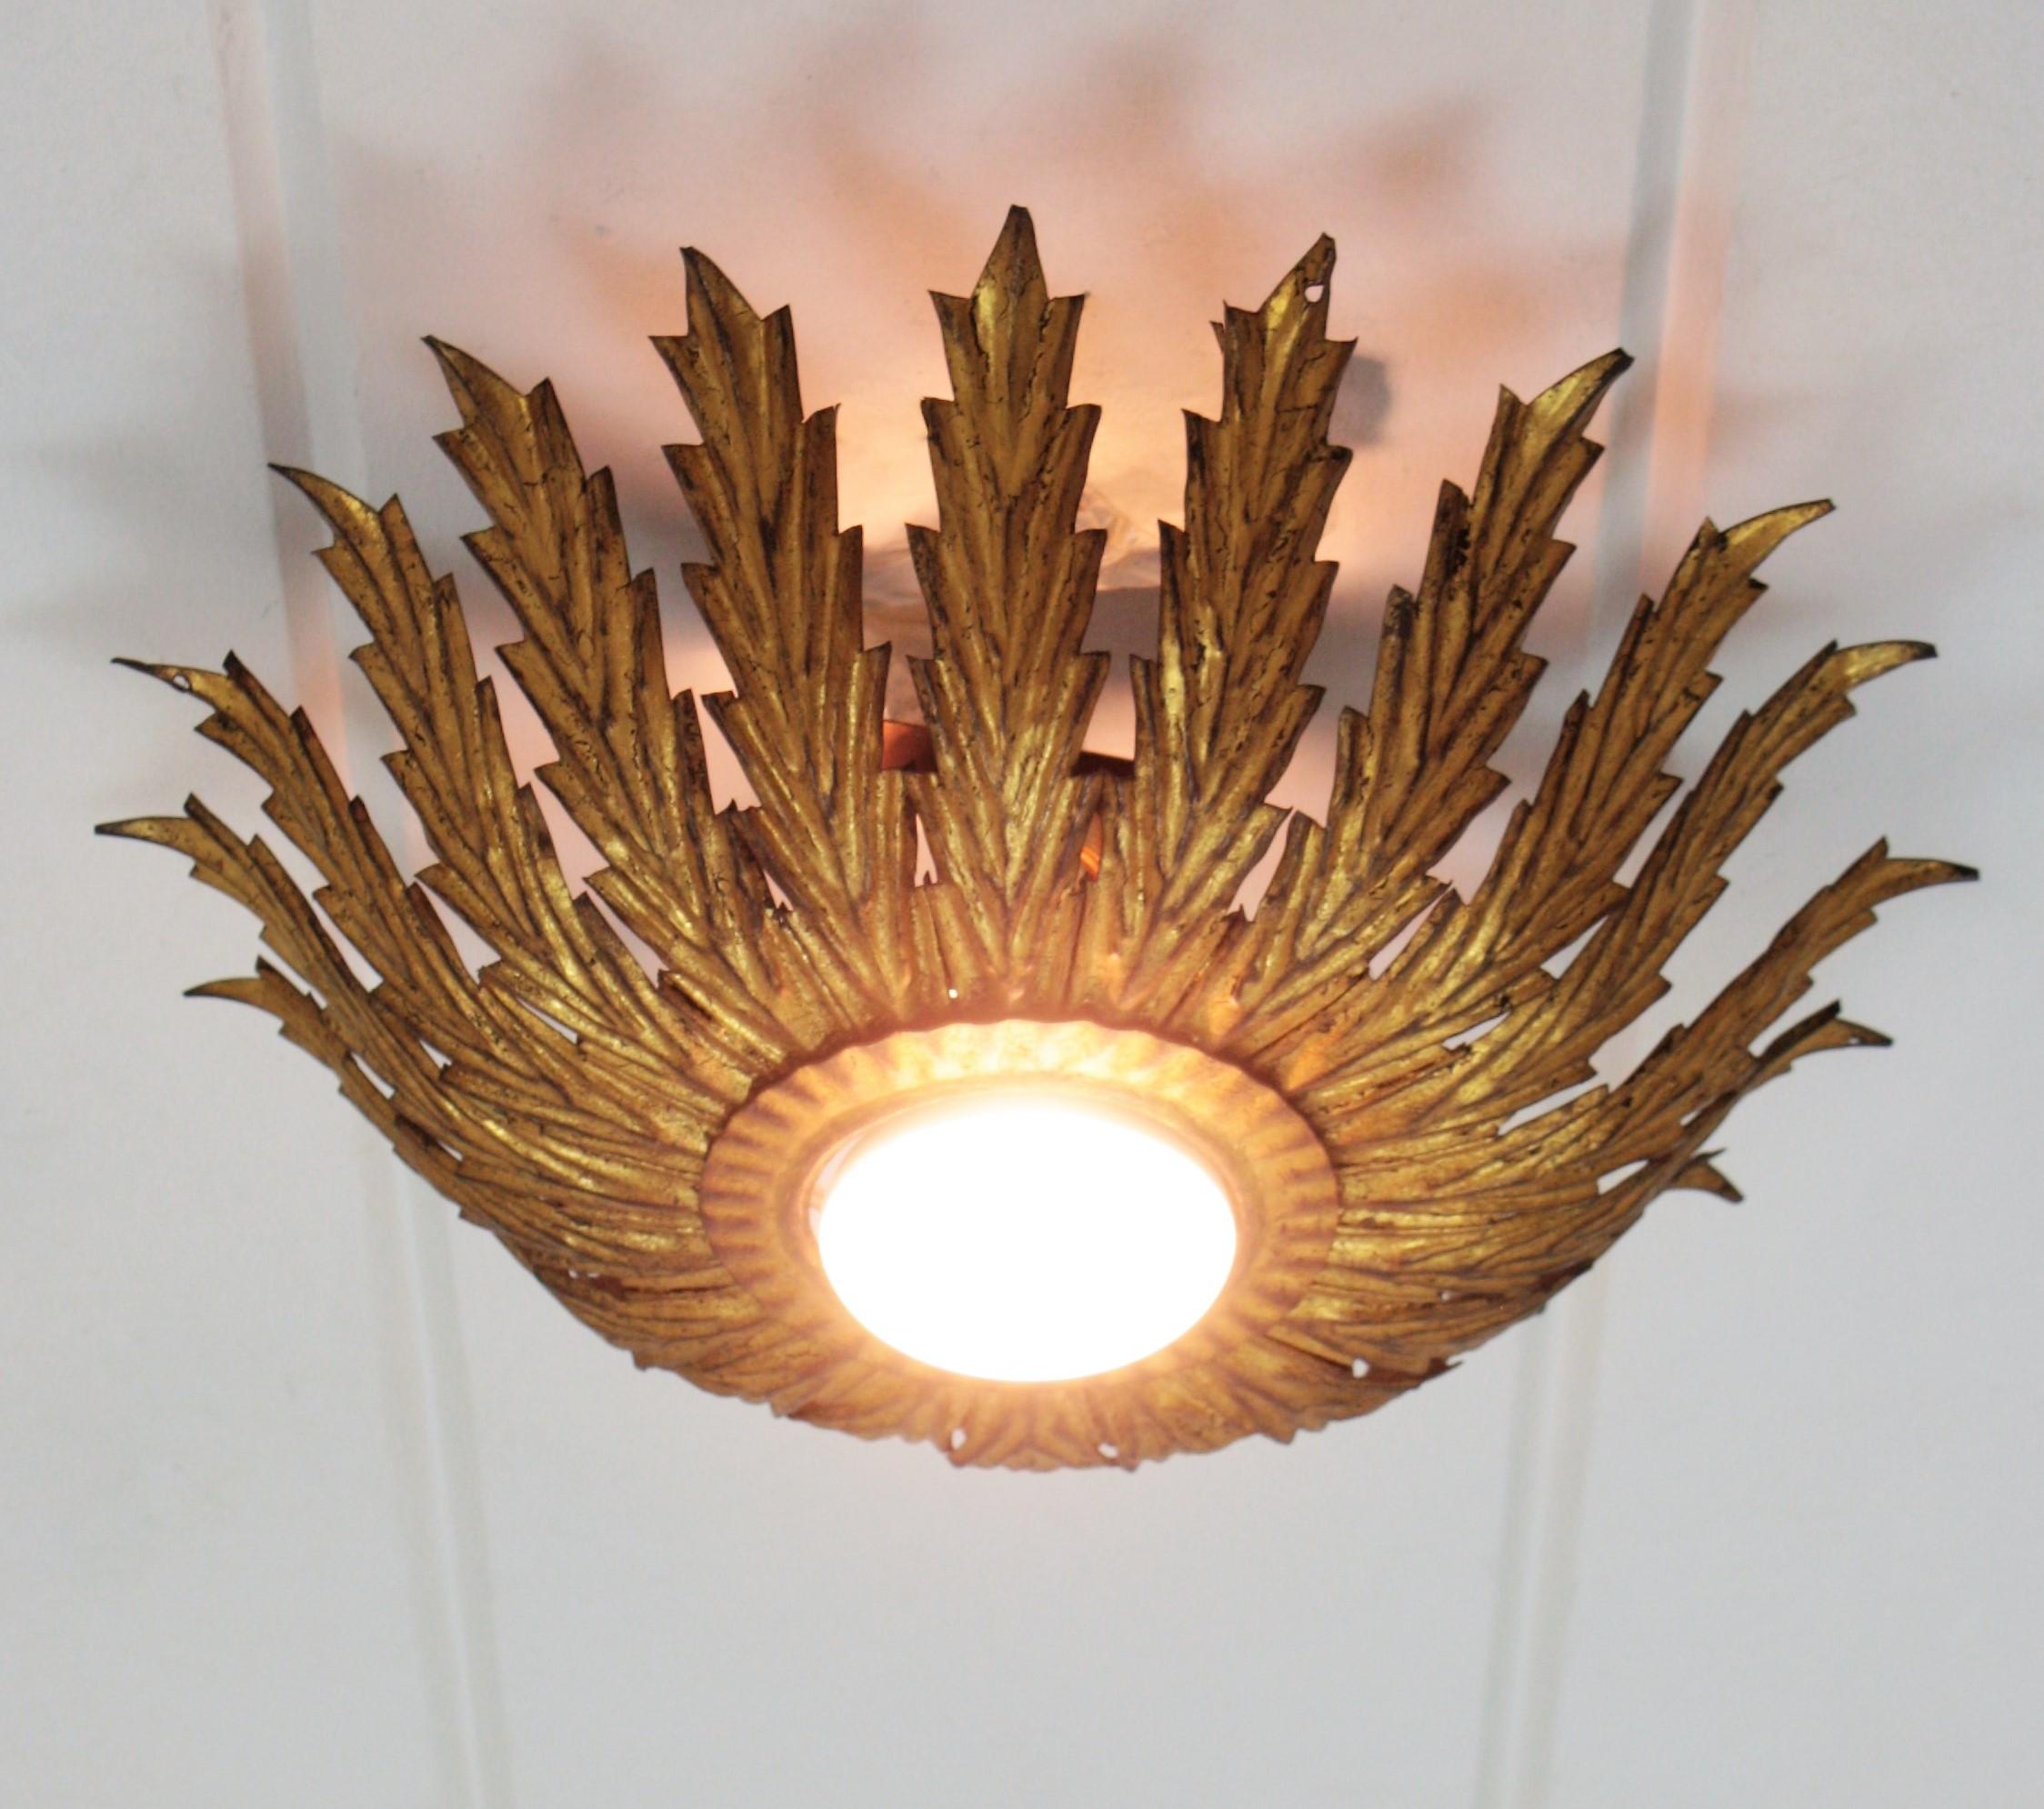 20th Century French Sunburst Light Fixture with Scalloped Leaves, Gilt Iron,  1950s For Sale